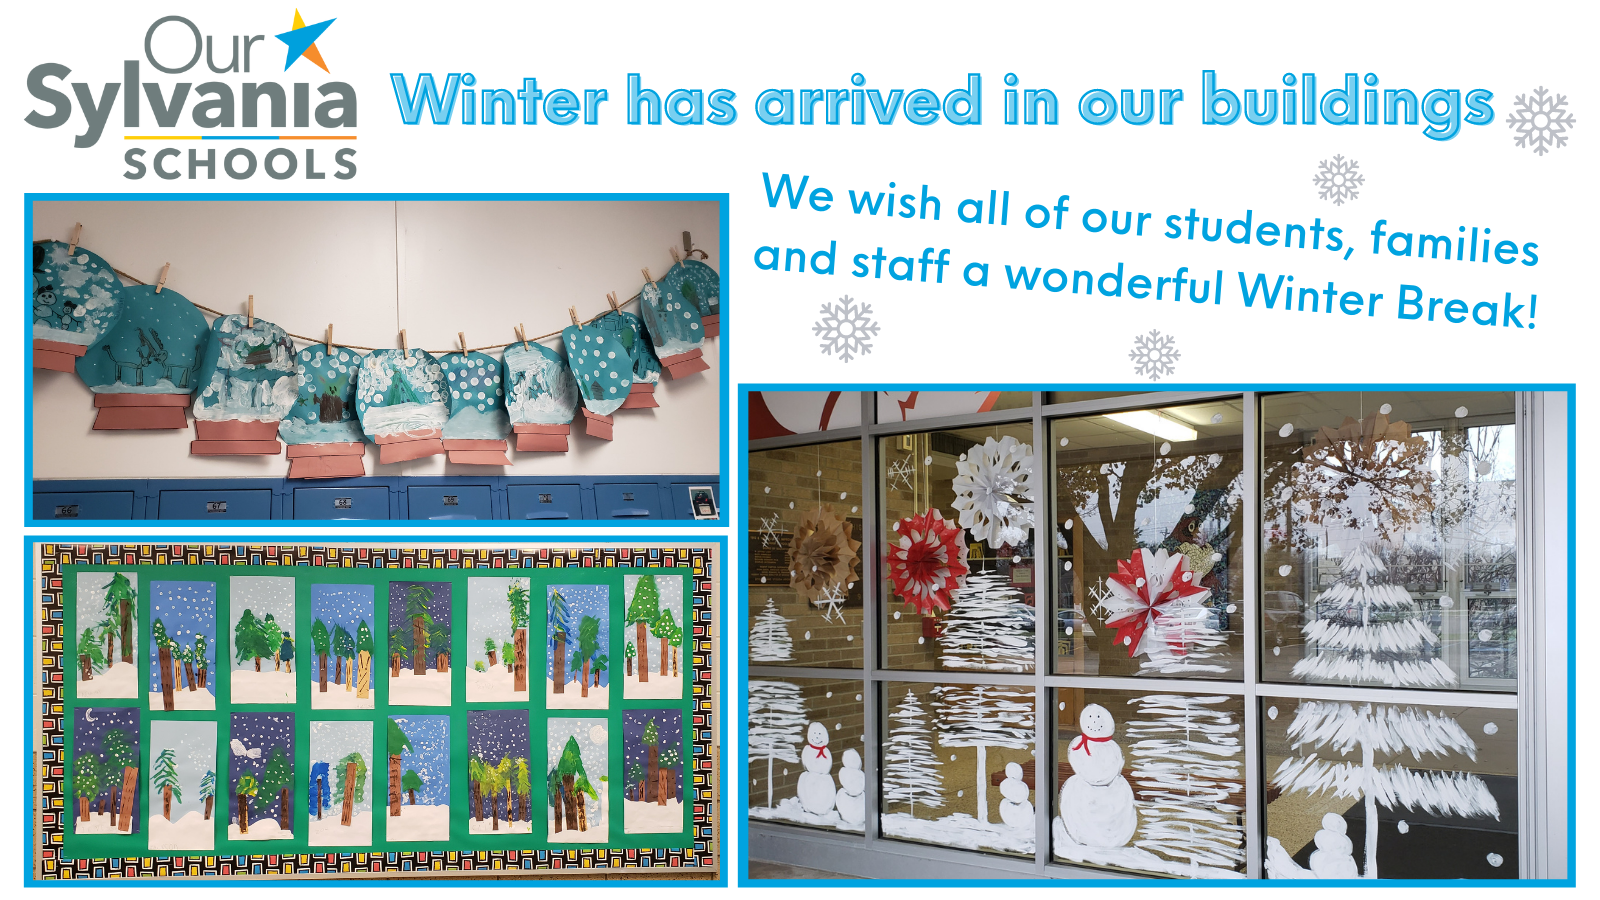 Winter has arrived in our buildings! We wish all of our students, families and staff a wonderful Winter Break!